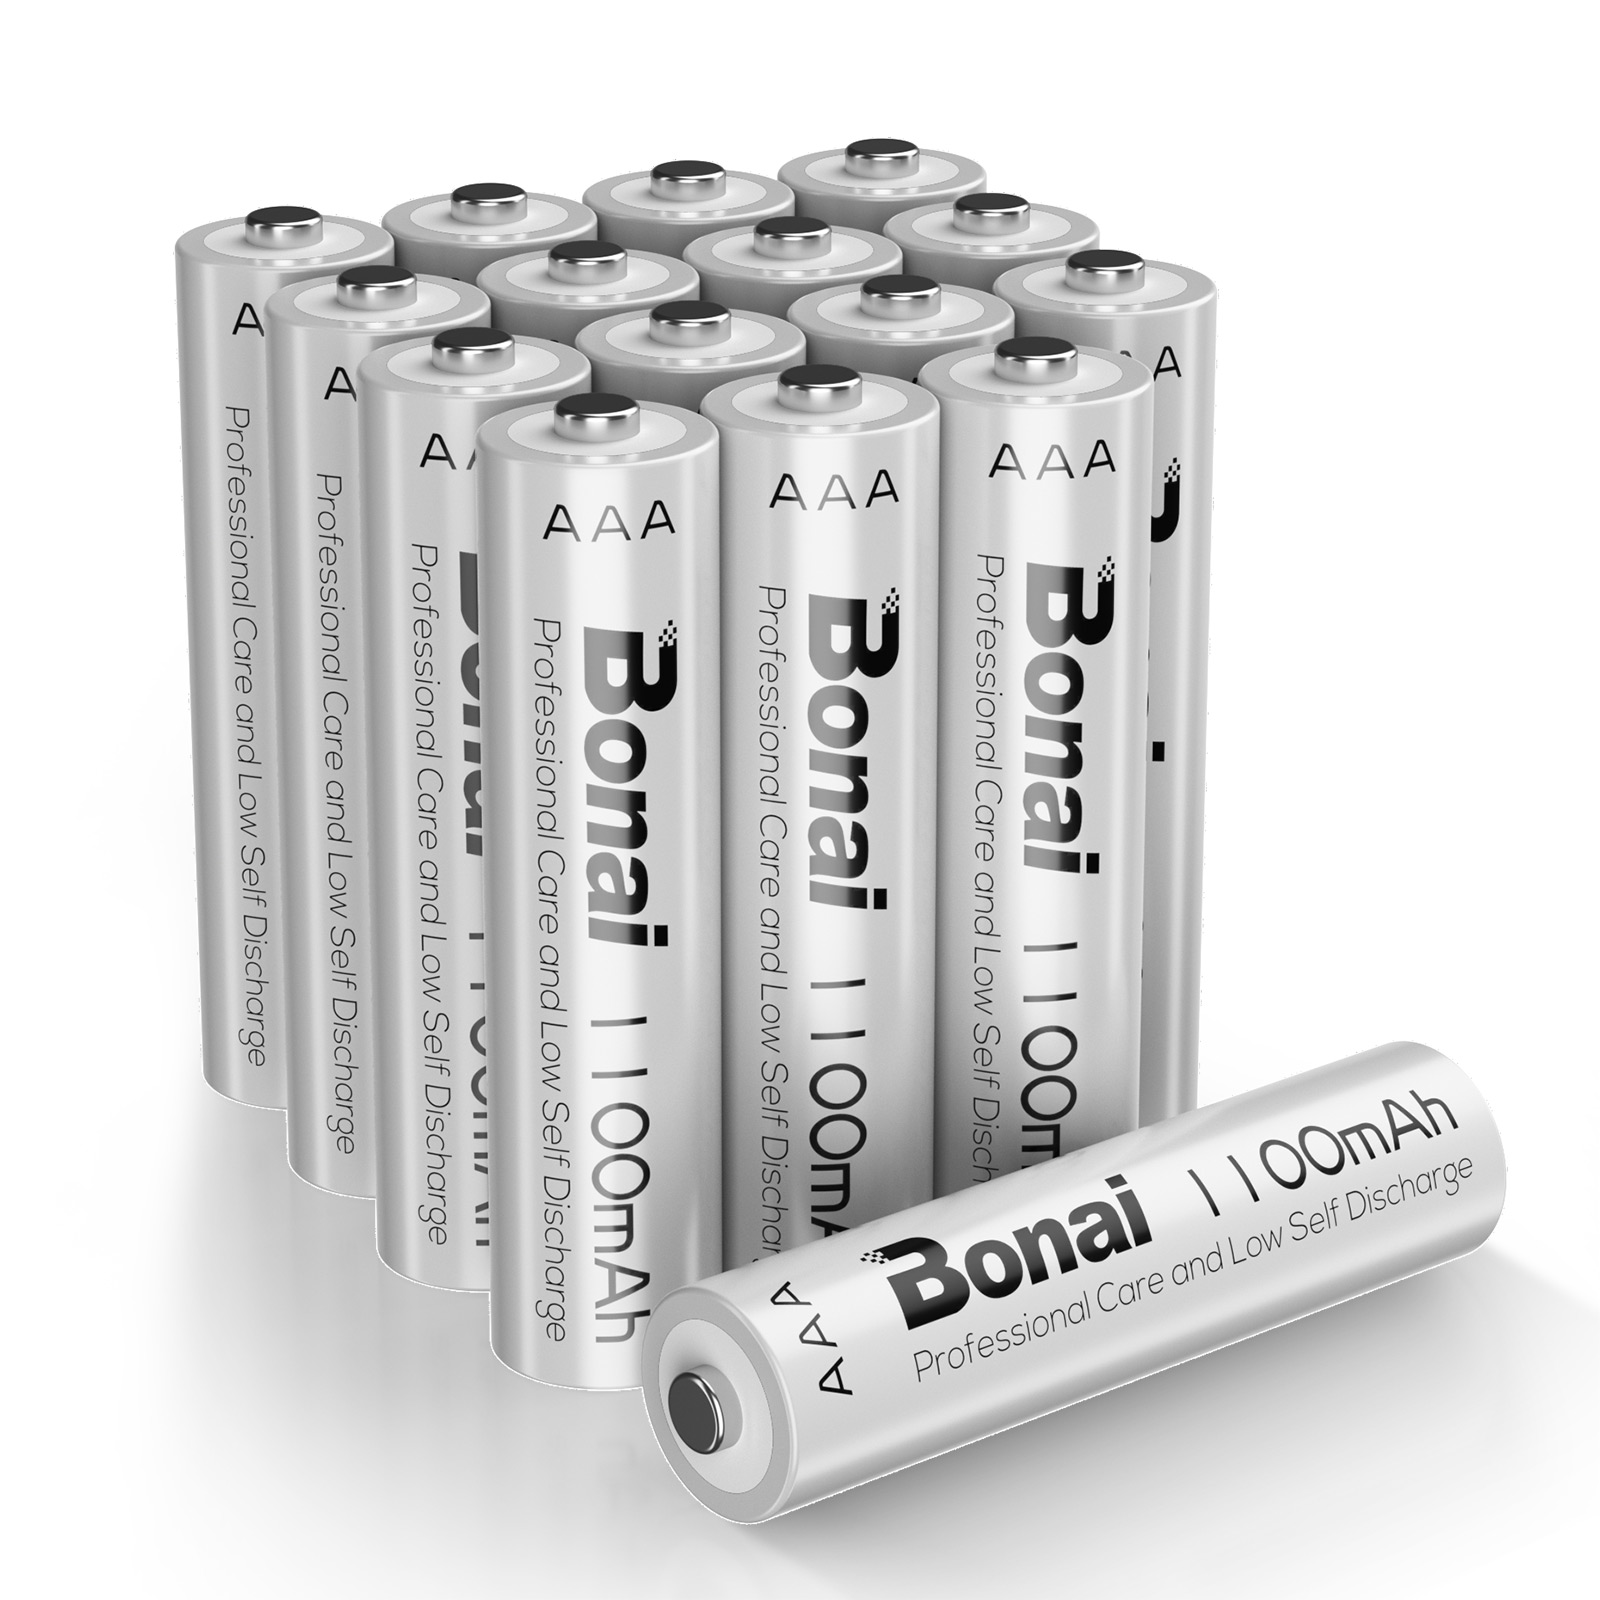 BONAI AAA Rechargeable Batteries 1.2V 1100mAh Ni-MH High-Capacity Triple-A Battery for Clocks, Remotes, Toys, Cameras, Flashlights, Games Controllers, E-Toothbrushes, Shavers, and More-16 Pack